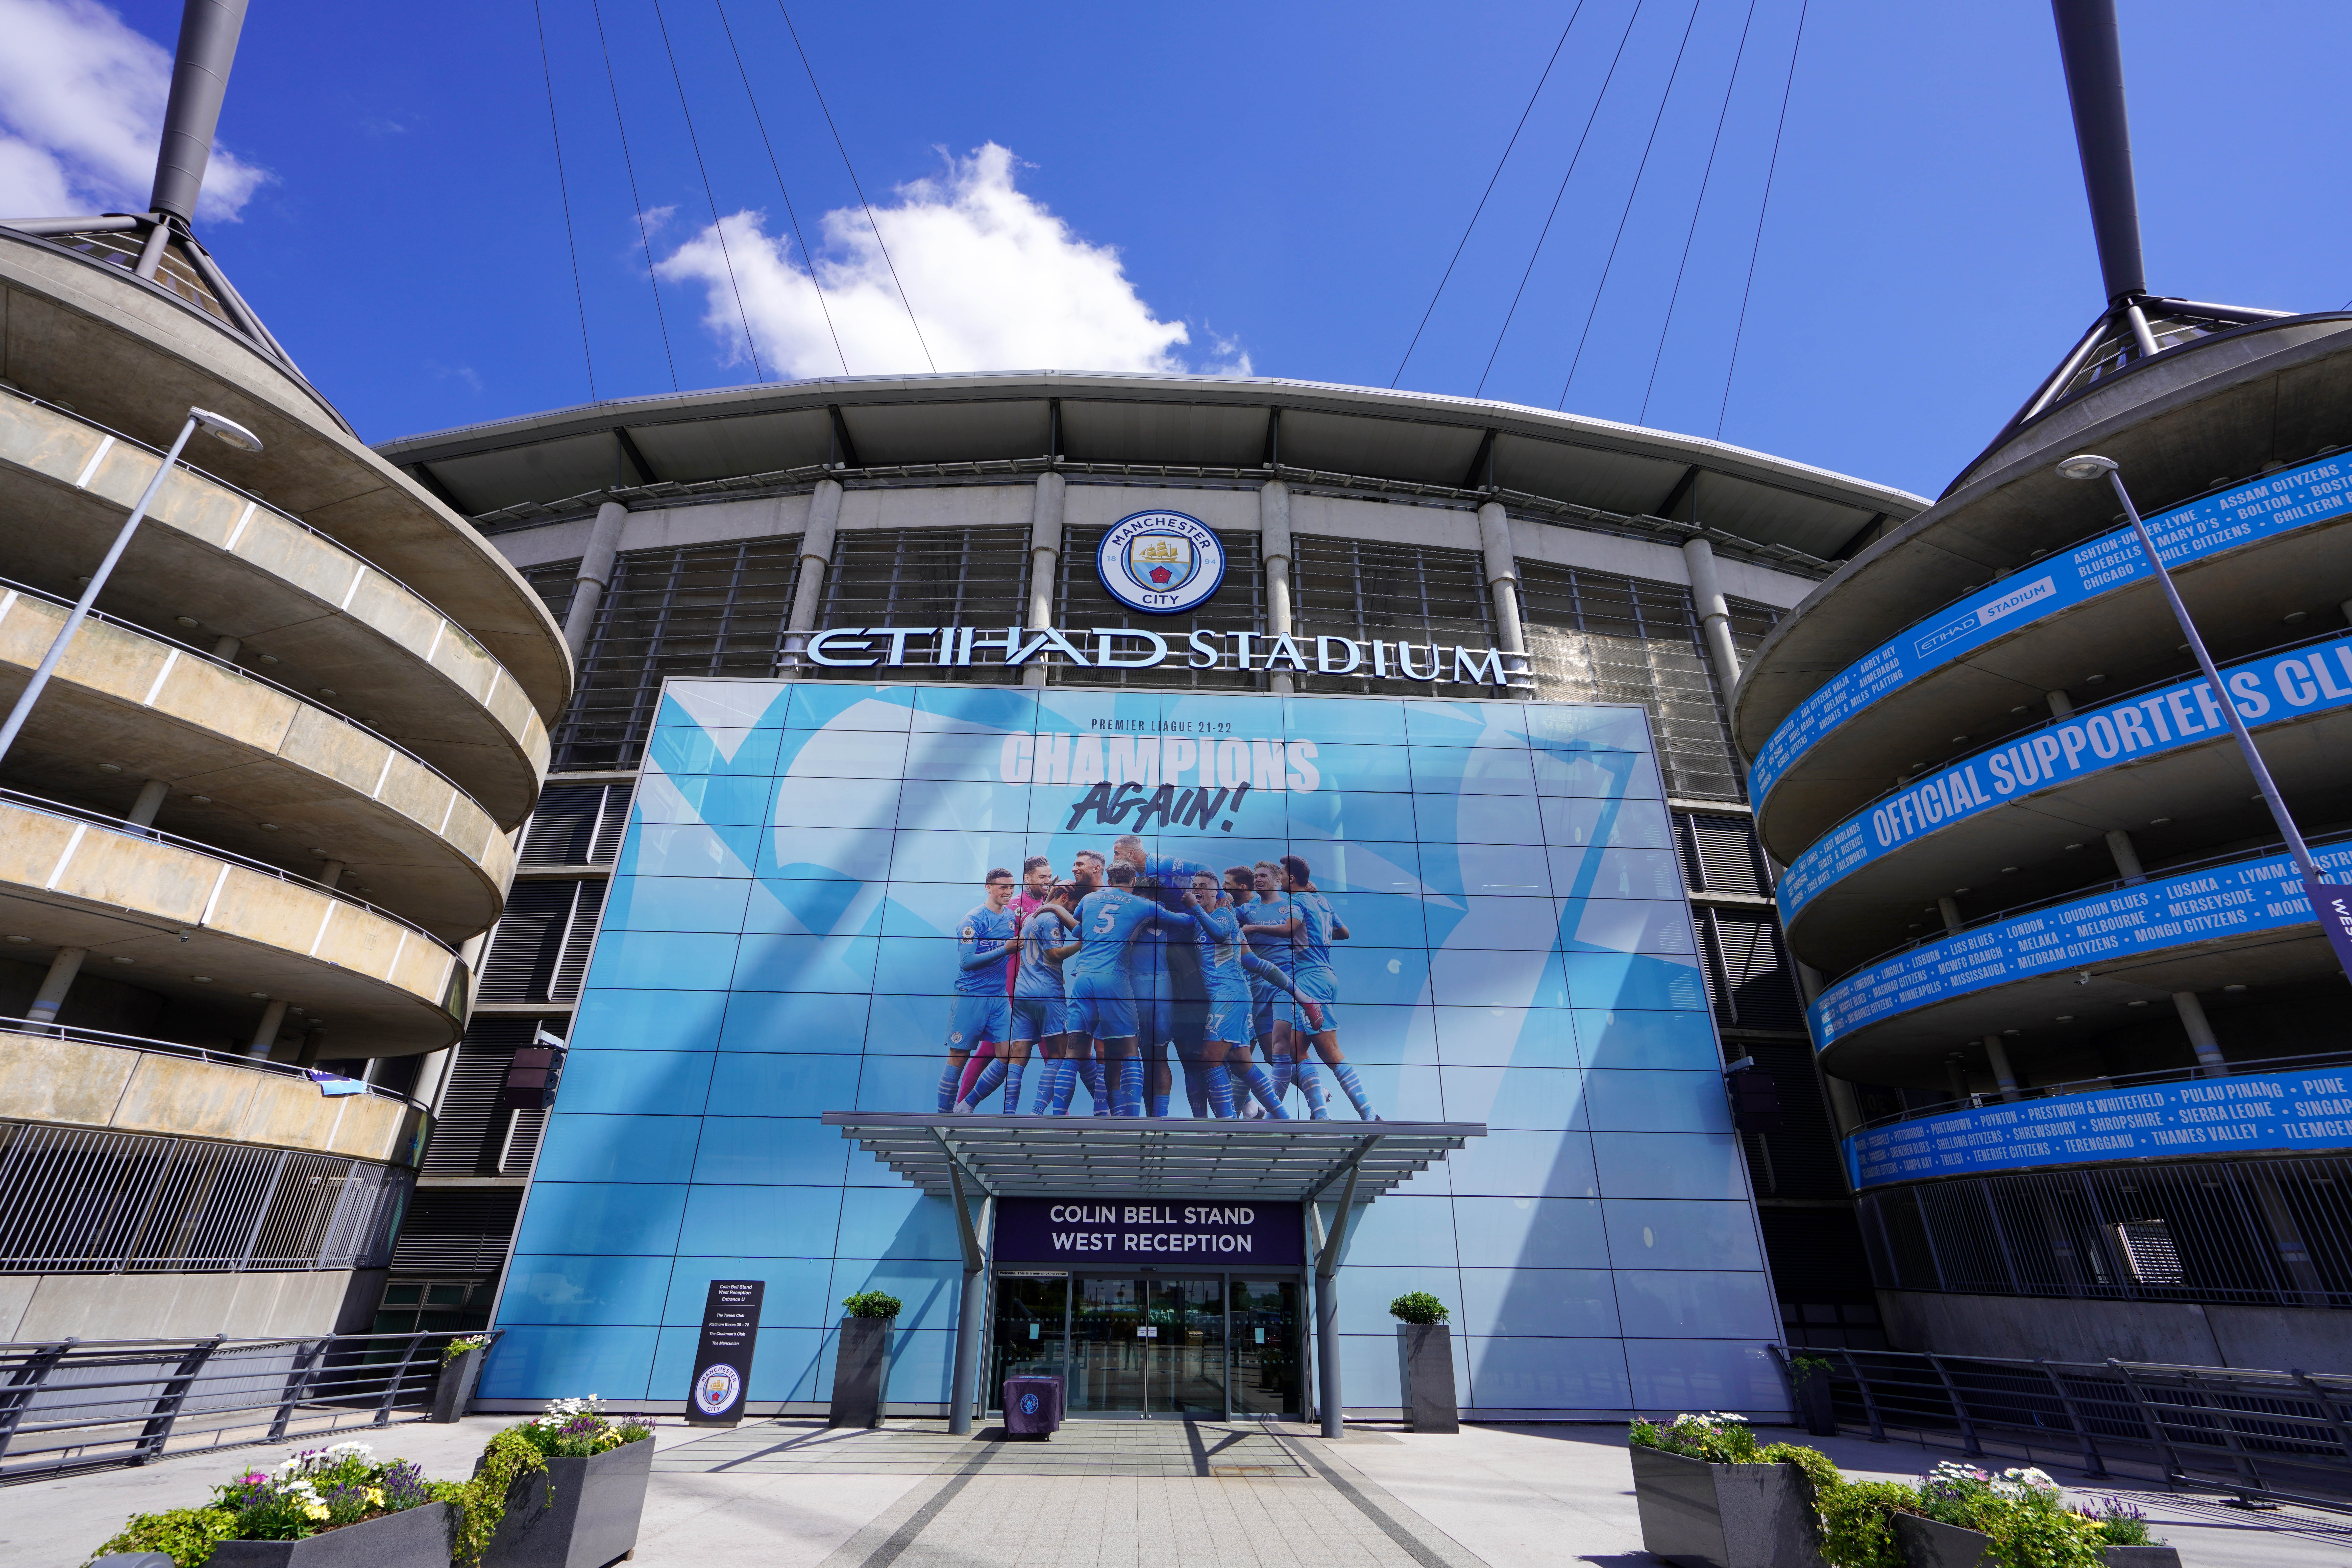 Manchester City are reportedly unhappy with the Premier League's proposed rule changes